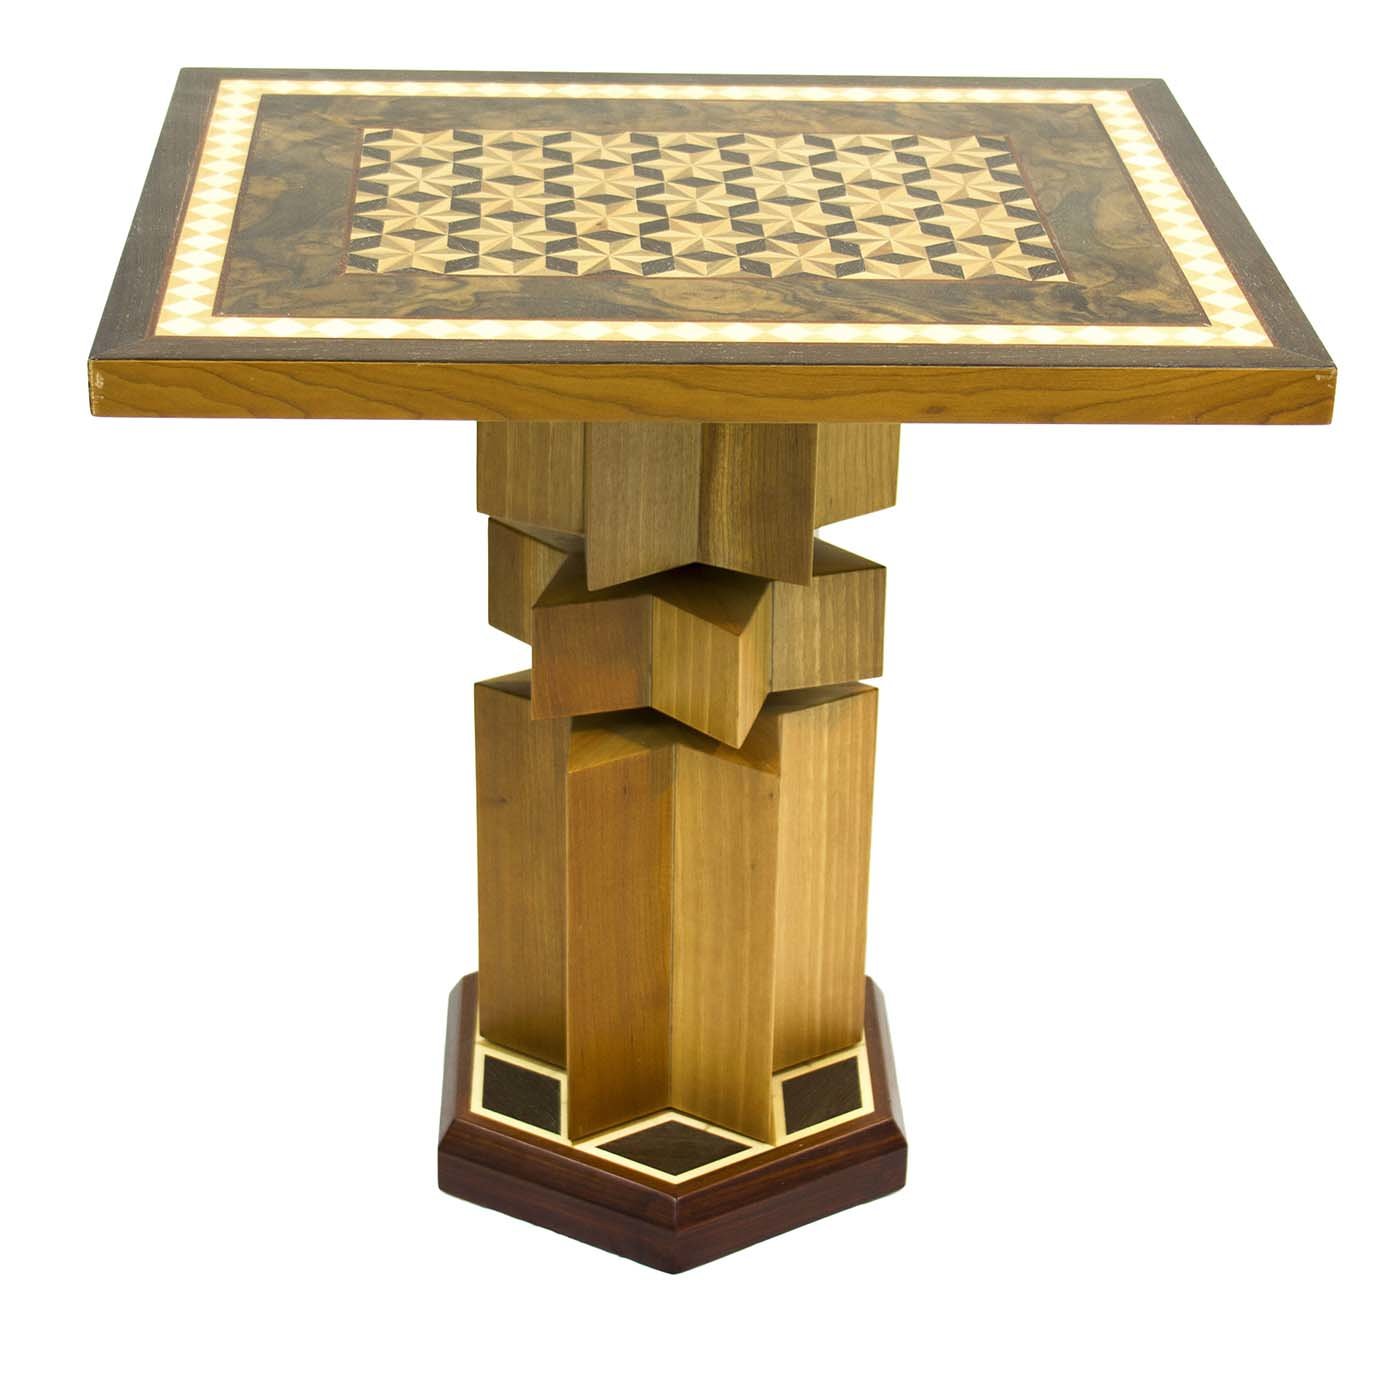 Inlaid Floral Field Table - Main view